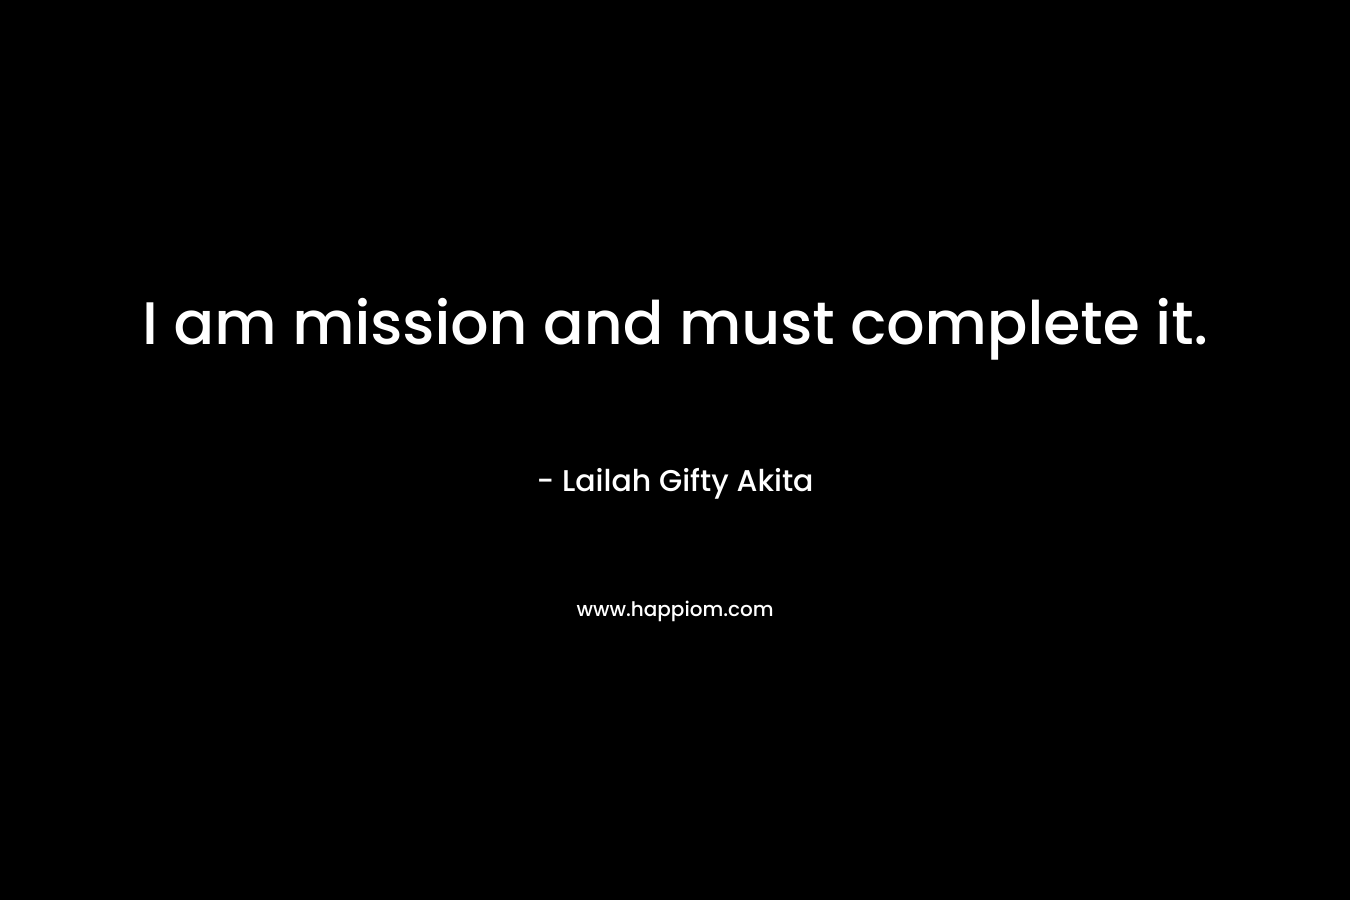 I am mission and must complete it.